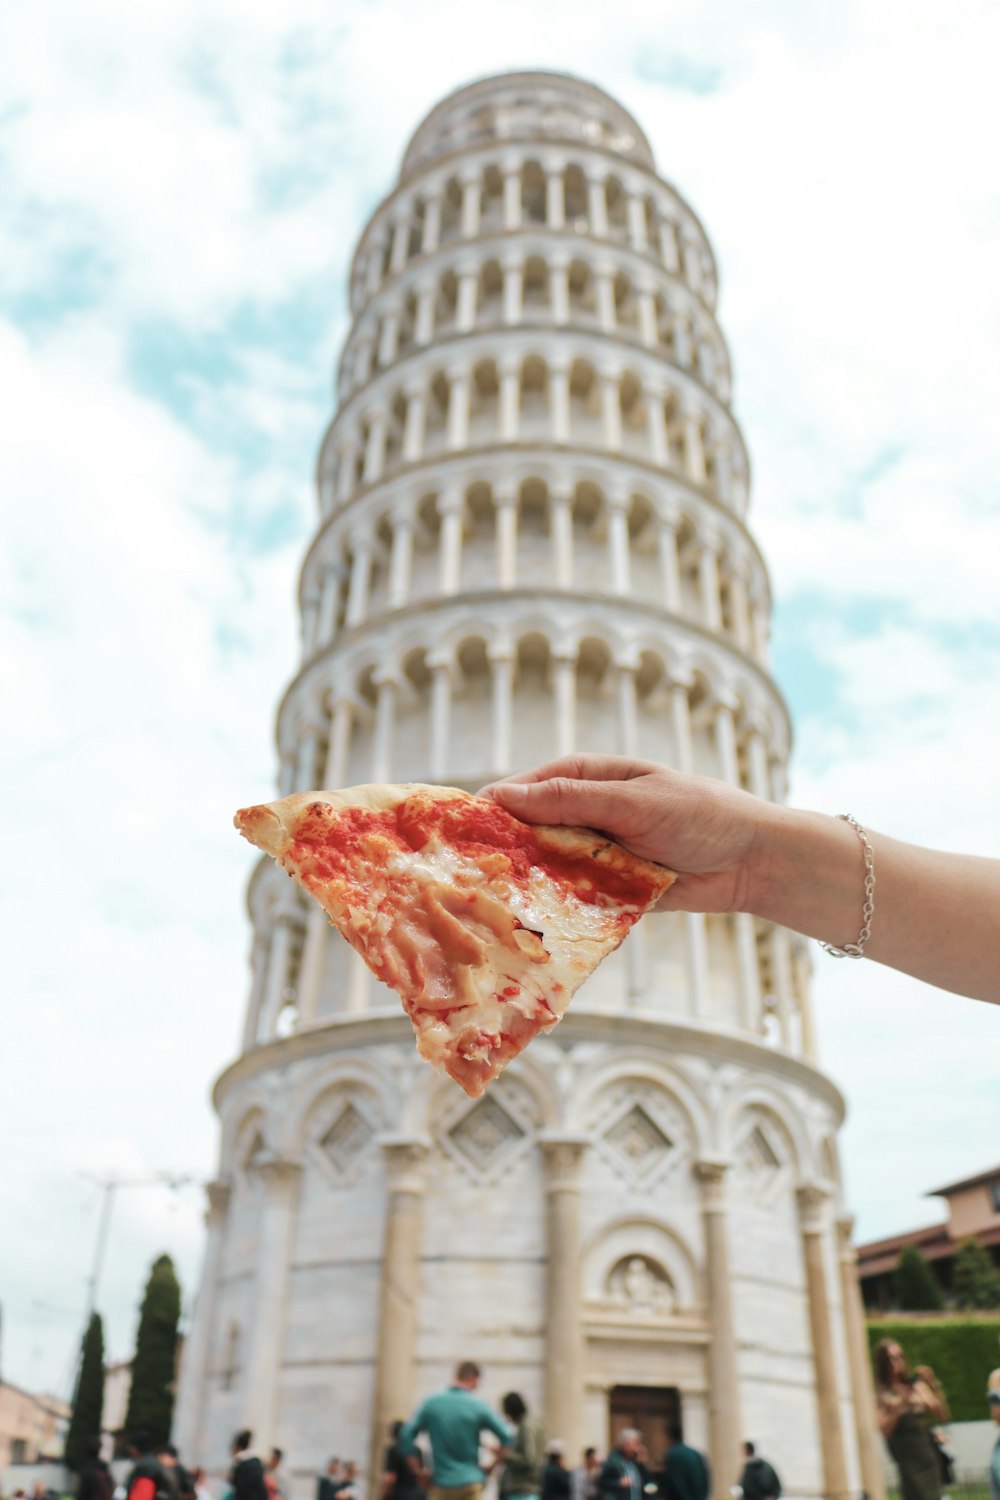 person holding pizza slice in front of Leaning Tower of Pisa, Italy during day